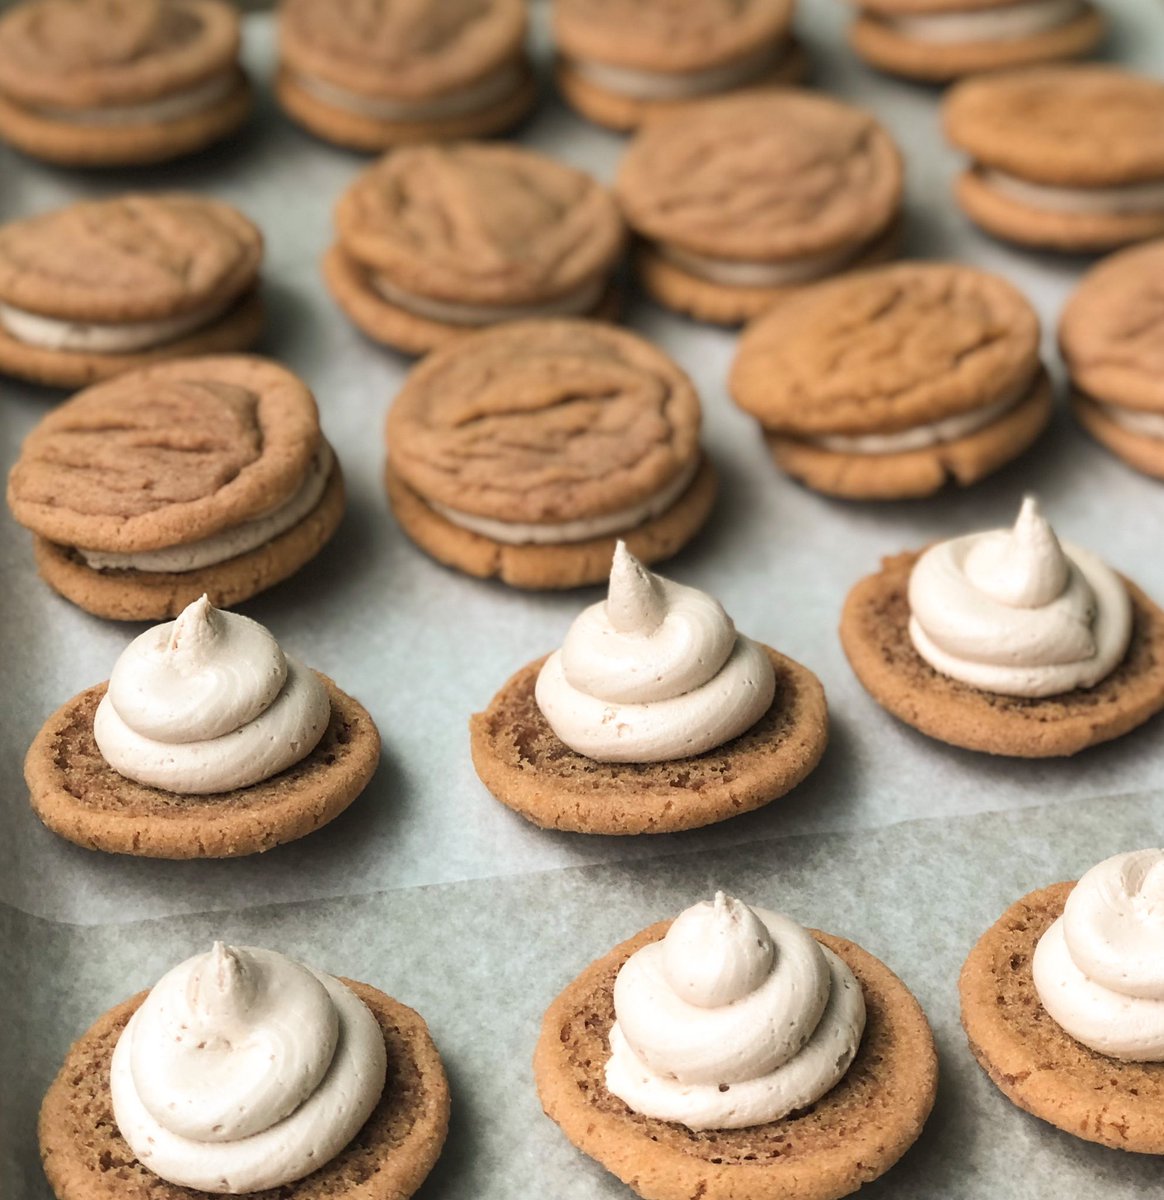 This weeks sammy is root beer float. Two root beer brown sugar cookies sandwiched together with vanilla root beer frosting! Tasty summer treats in cookie form. Available in the shop starting Tuesday or in Fridays delivery box: bloomcookieco.ca/apps/builder?b…